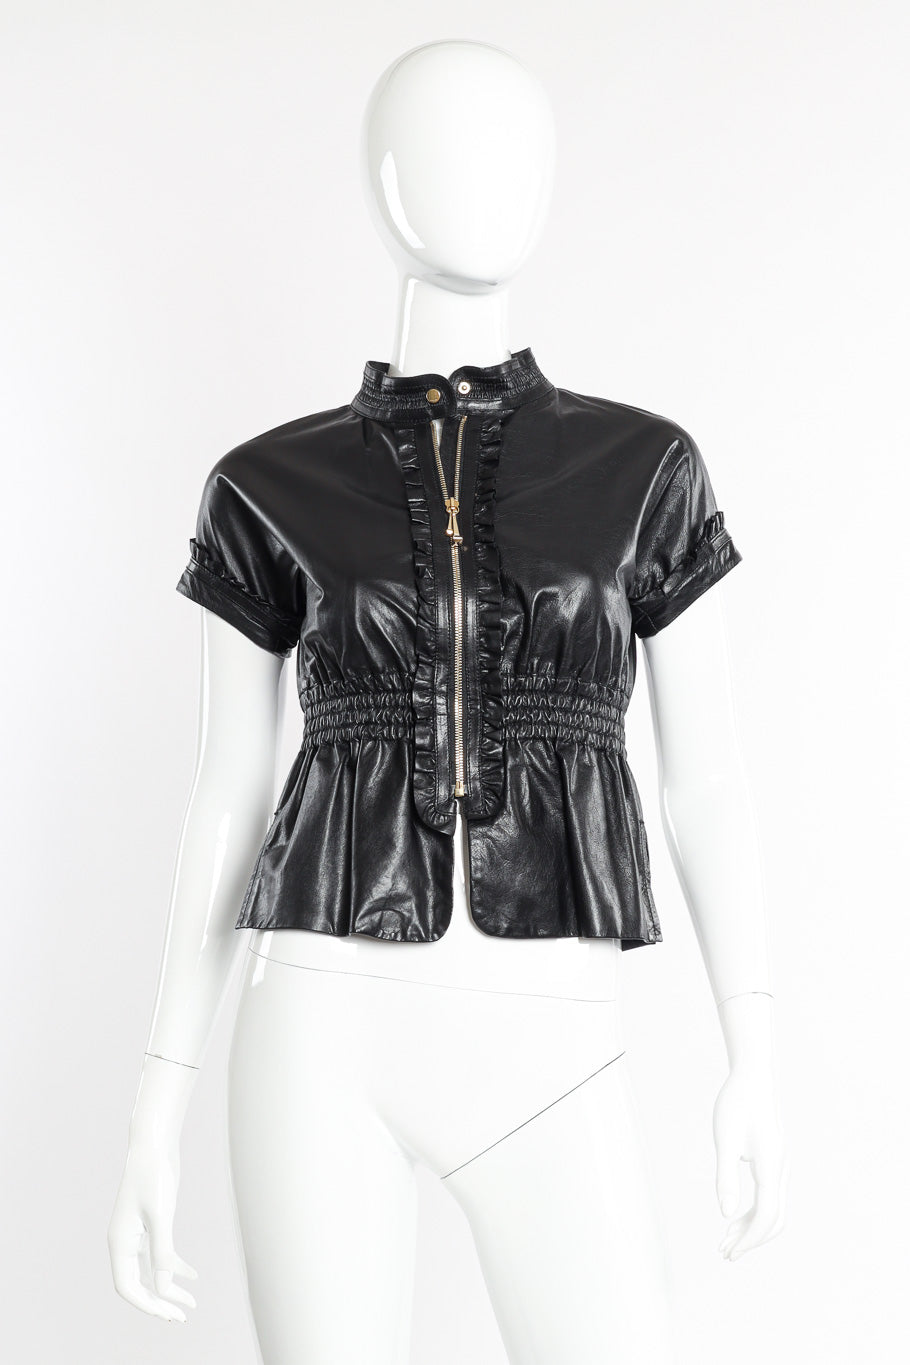 Gucci Leather Ruffle Top front view on mannequin @Recessla